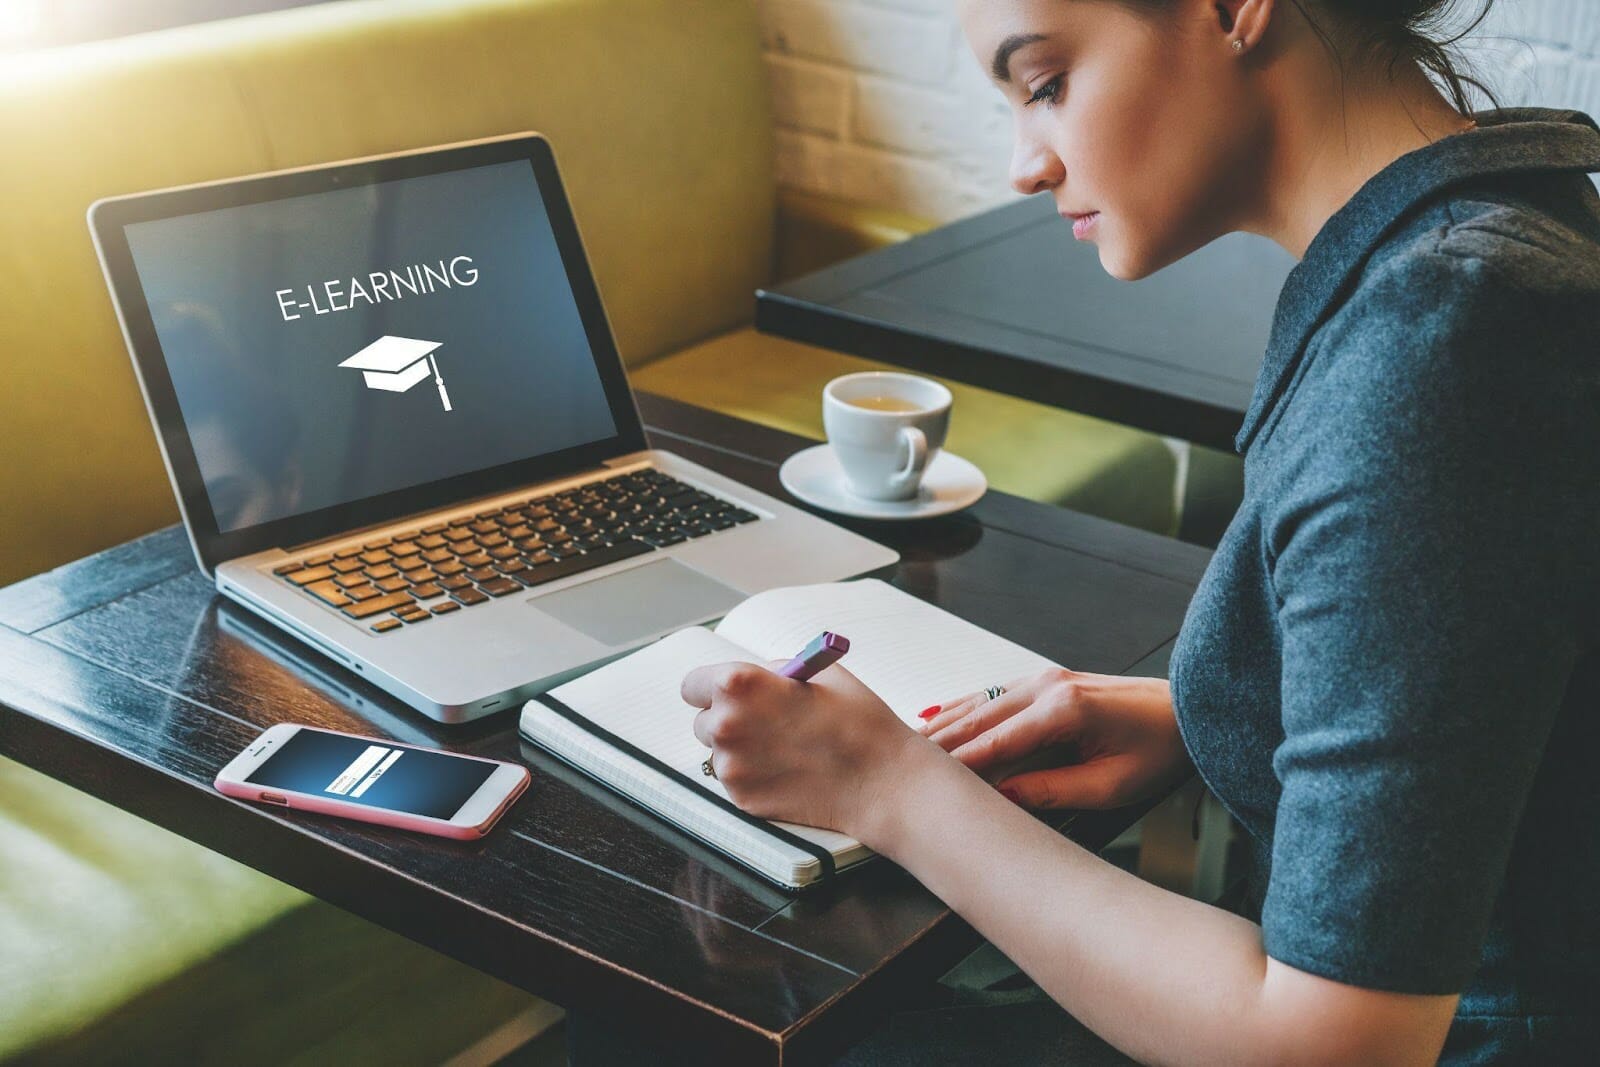 Career planning - online course and e-learning